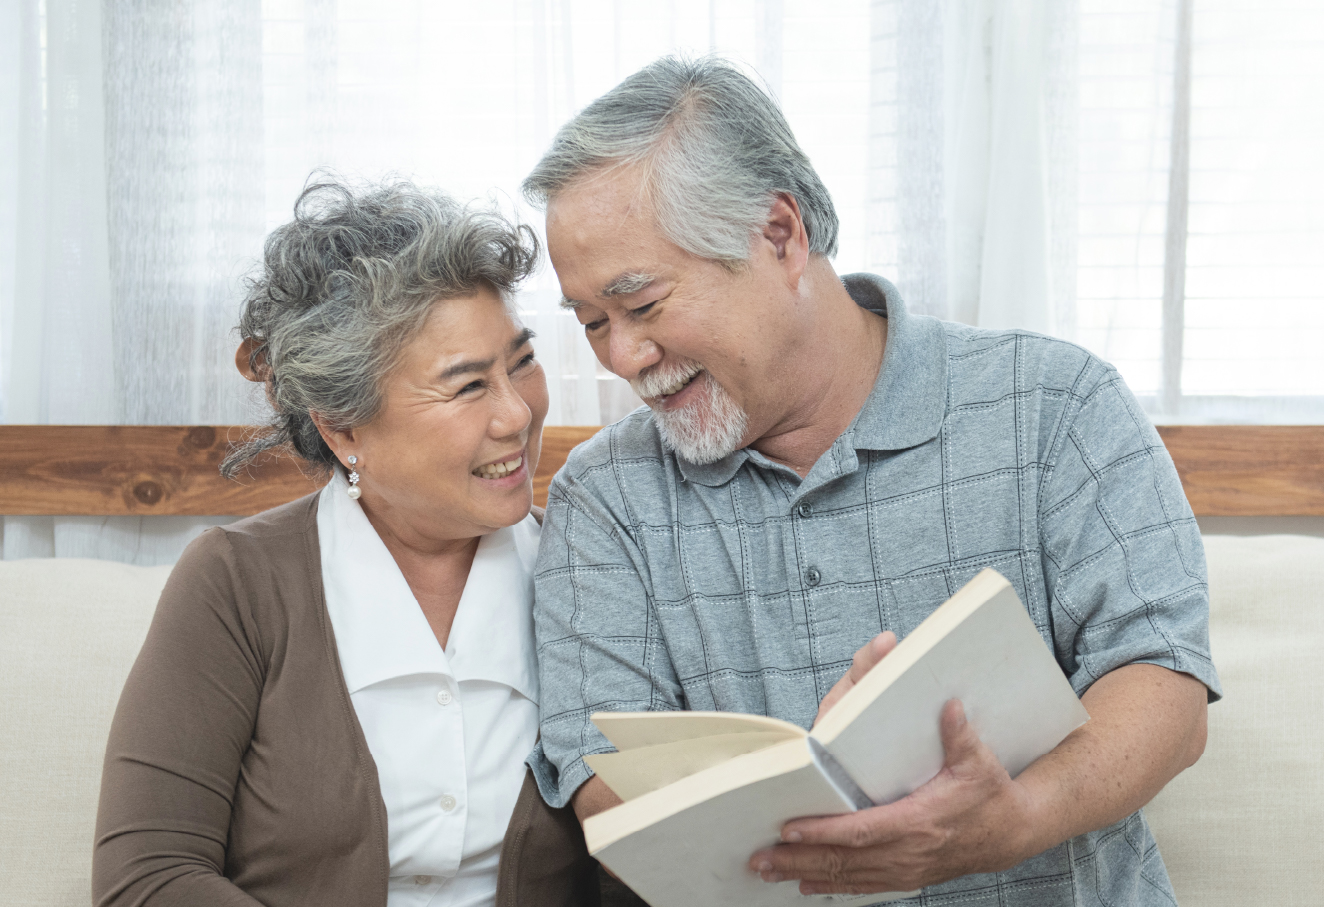 A pair of elderly asian couple is sitting very close together showing affection to each other. The elderly asian man is holding and pointing to the book's contents while looking and smiling at the woman. The woman is seated close to the man and looking at him smiling.